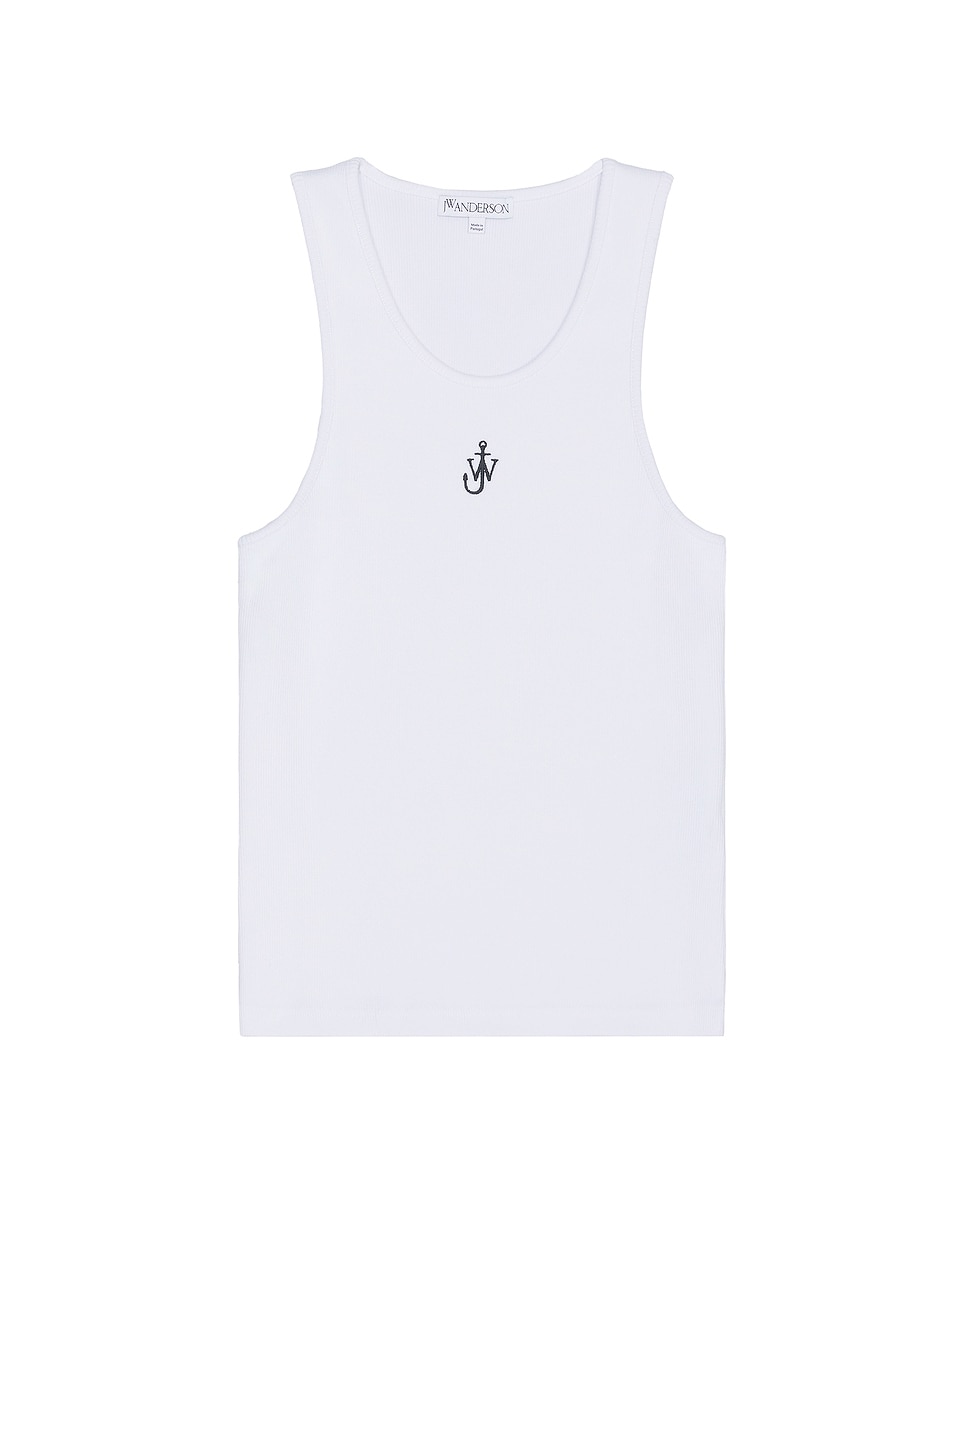 Image 1 of JW Anderson Anchor Embroidery Tank Top in White